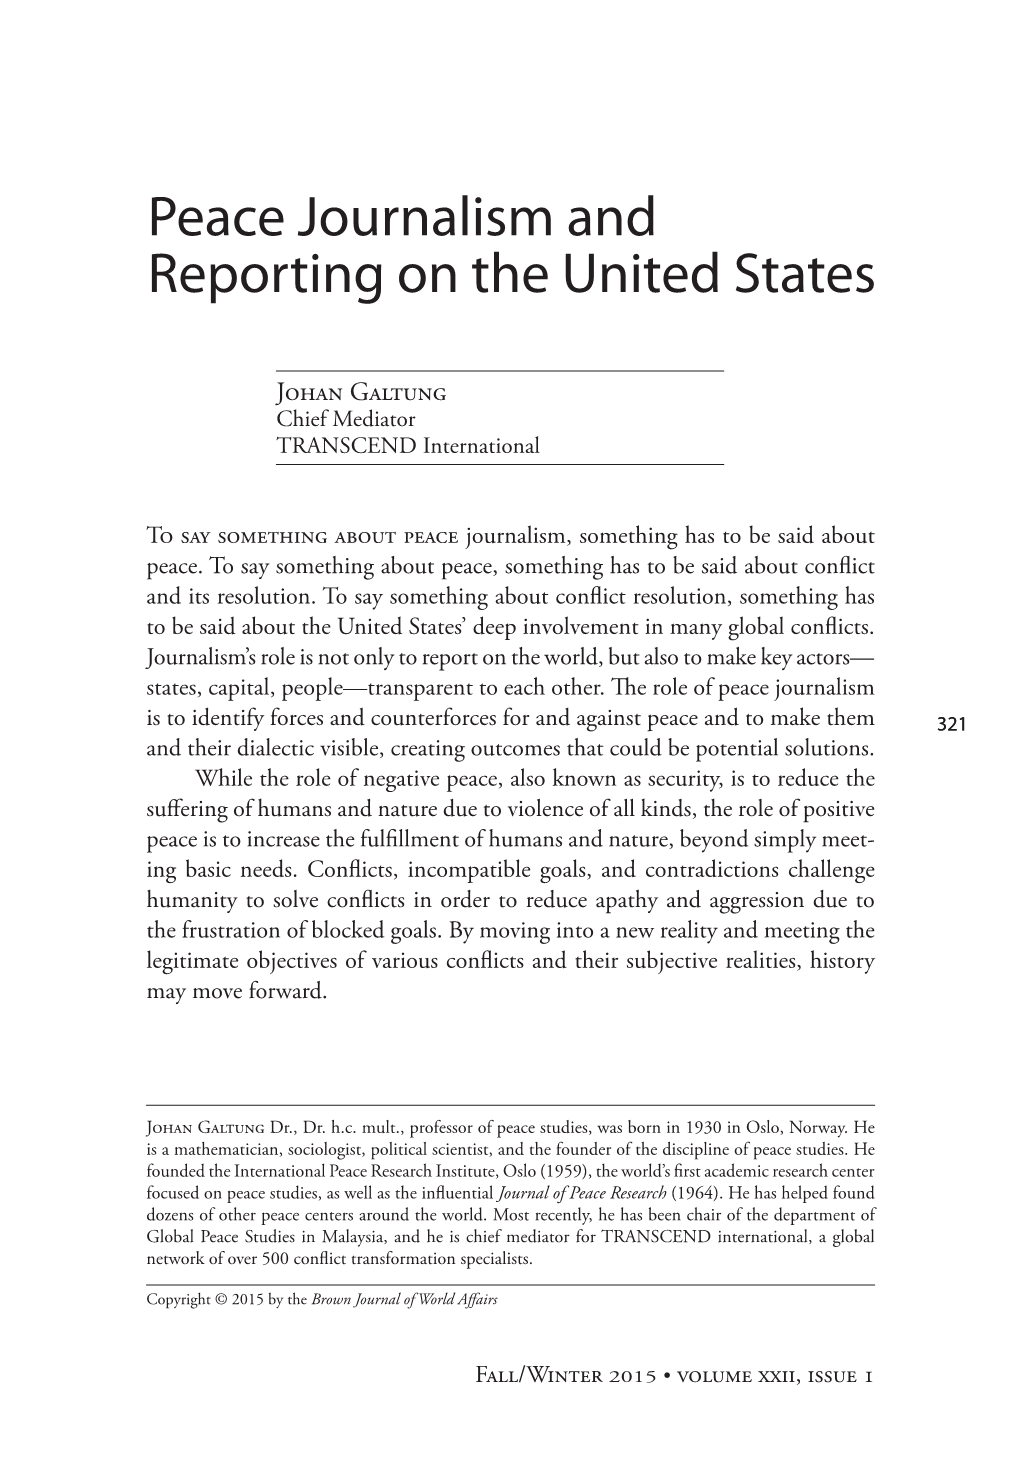 Peace Journalism and Reporting on the United States